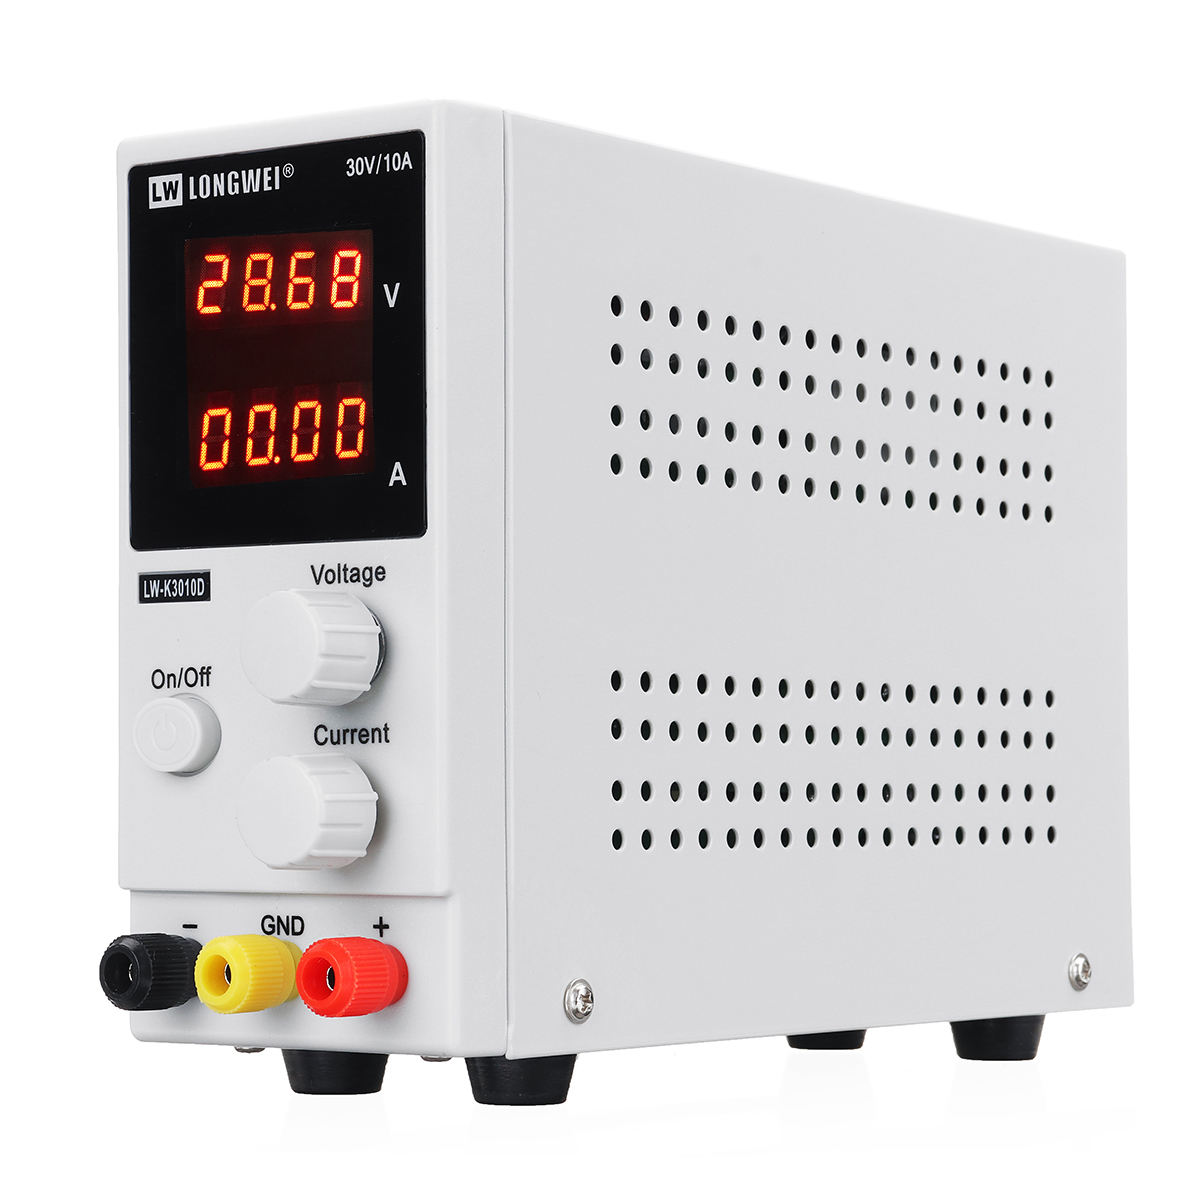 

LW-K3010D DC Power Supply Variable 0-30V/ 0-10A 110V/220V Adjustable Switching Regulated Power Supply Dual Display 0.01 Accuracy